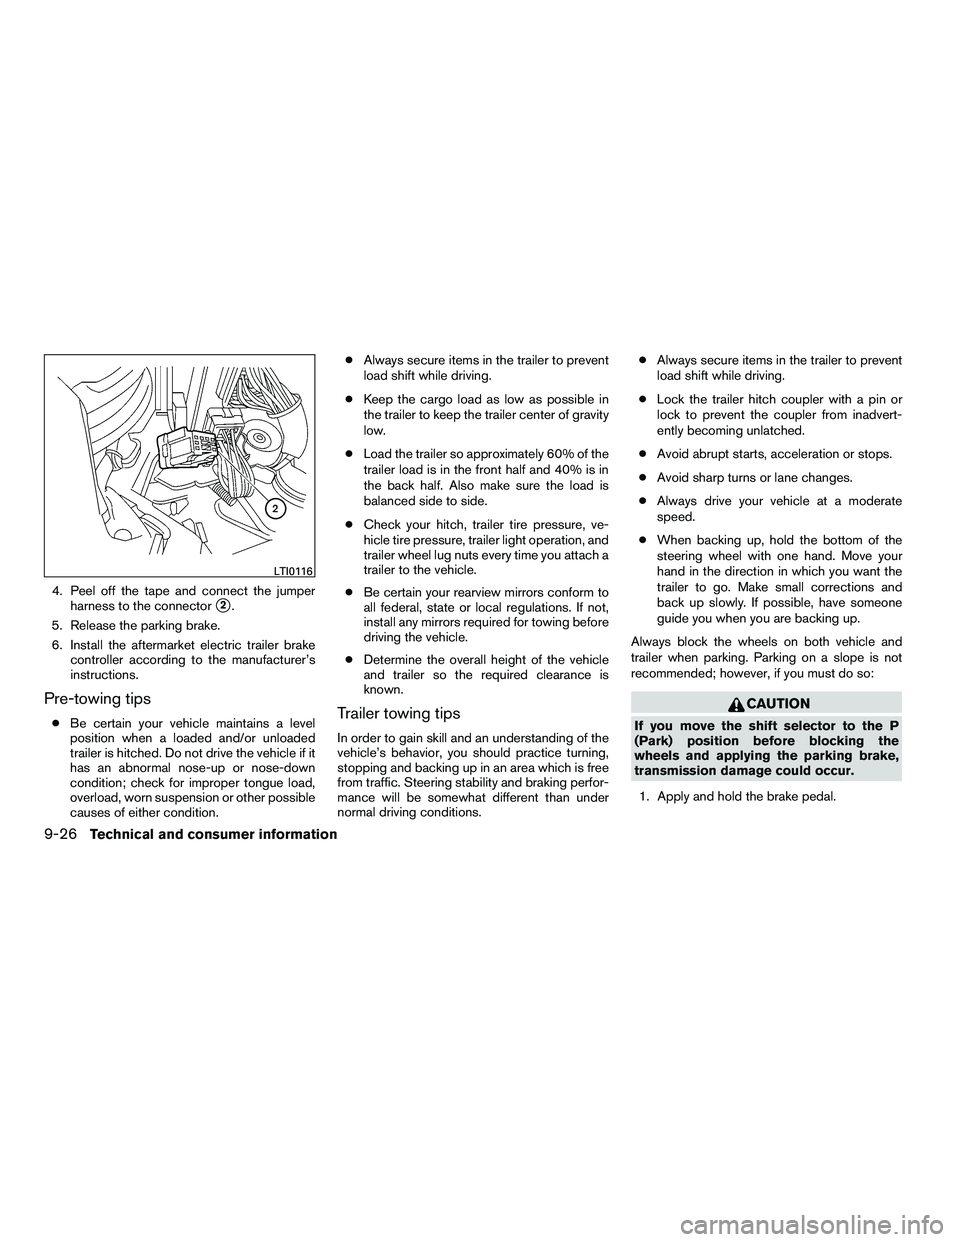 NISSAN ARMADA 2010  Owners Manual 4. Peel off the tape and connect the jumperharness to the connector
2.
5. Release the parking brake.
6. Install the aftermarket electric trailer brake controller according to the manufacturer’s
ins